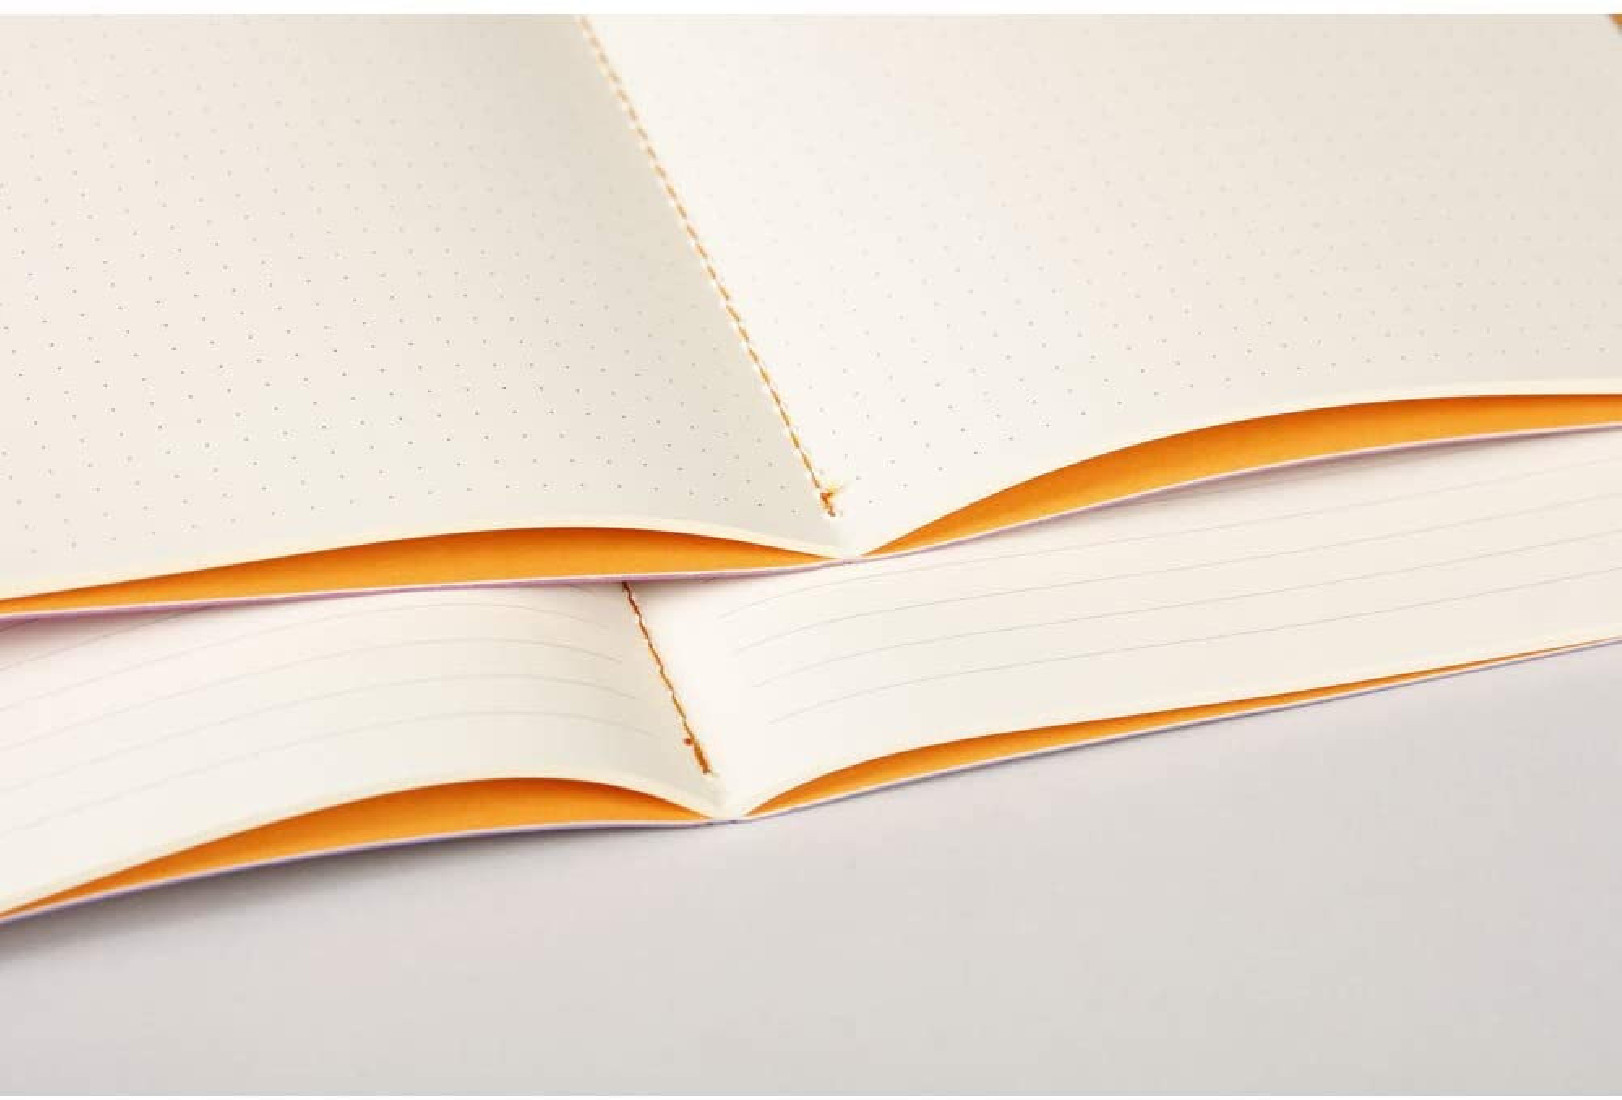 Rhodia Sewn spine notebook A5(14,8 x 21 cm) beige lined 116405